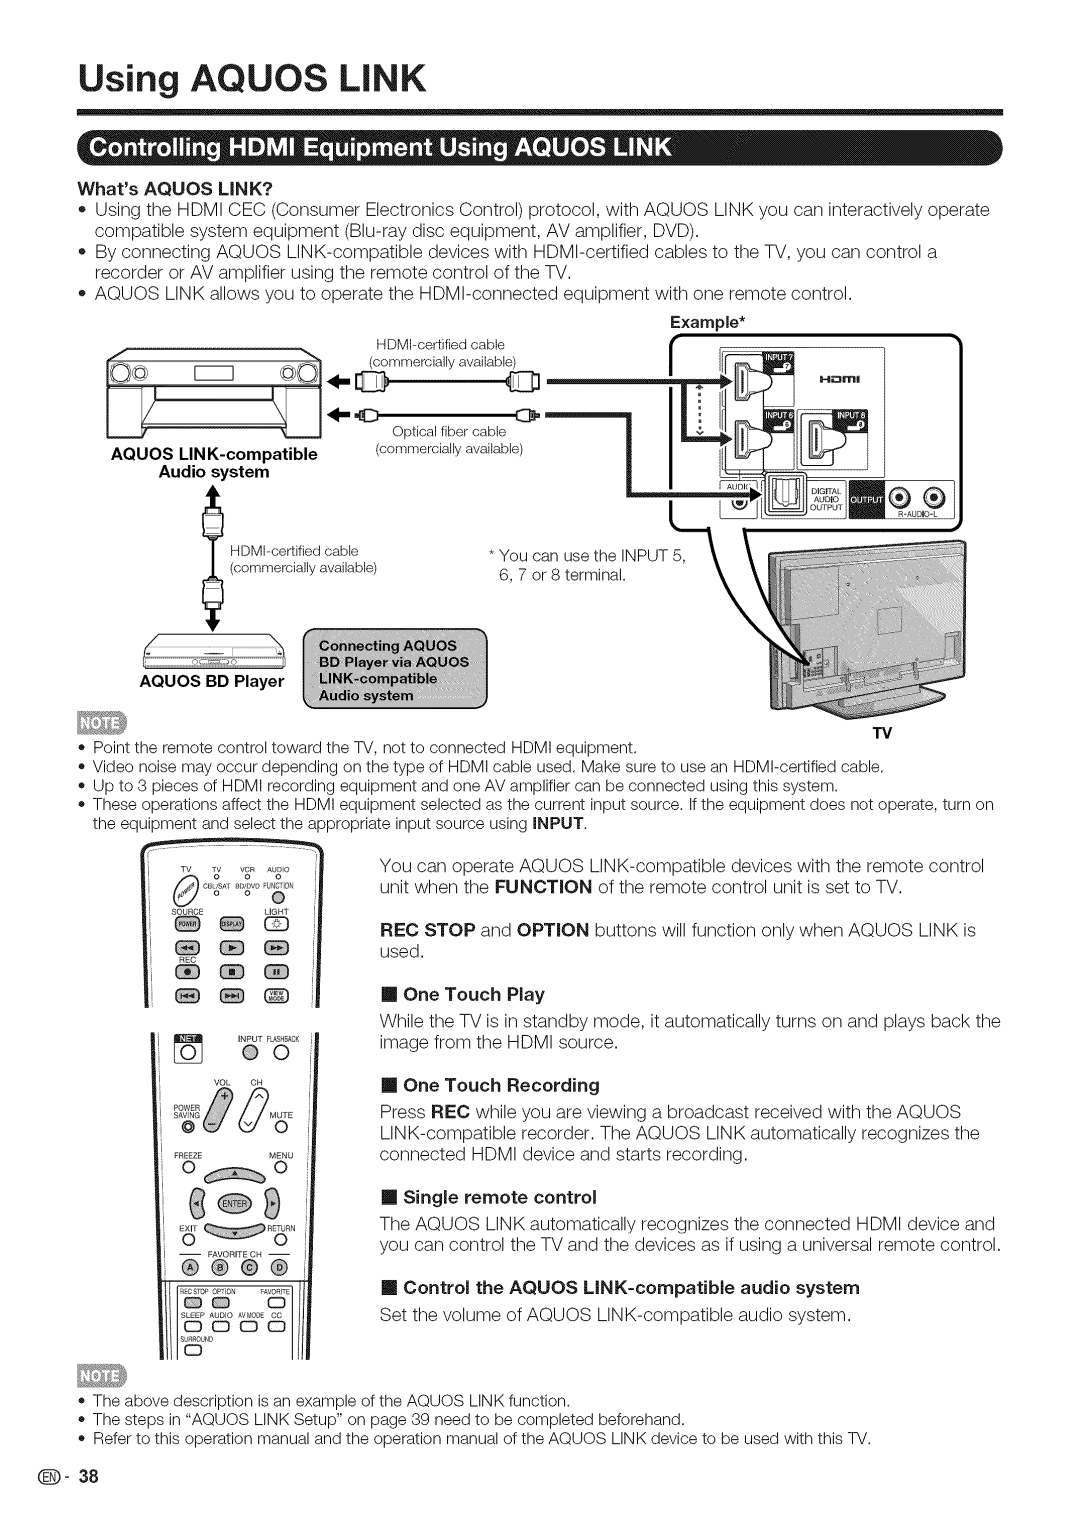 Sharp LC-52LE700, LC-40LE700, LC-46LE700 operation manual Using AQUOS LINK, FLdK, C3 C3 